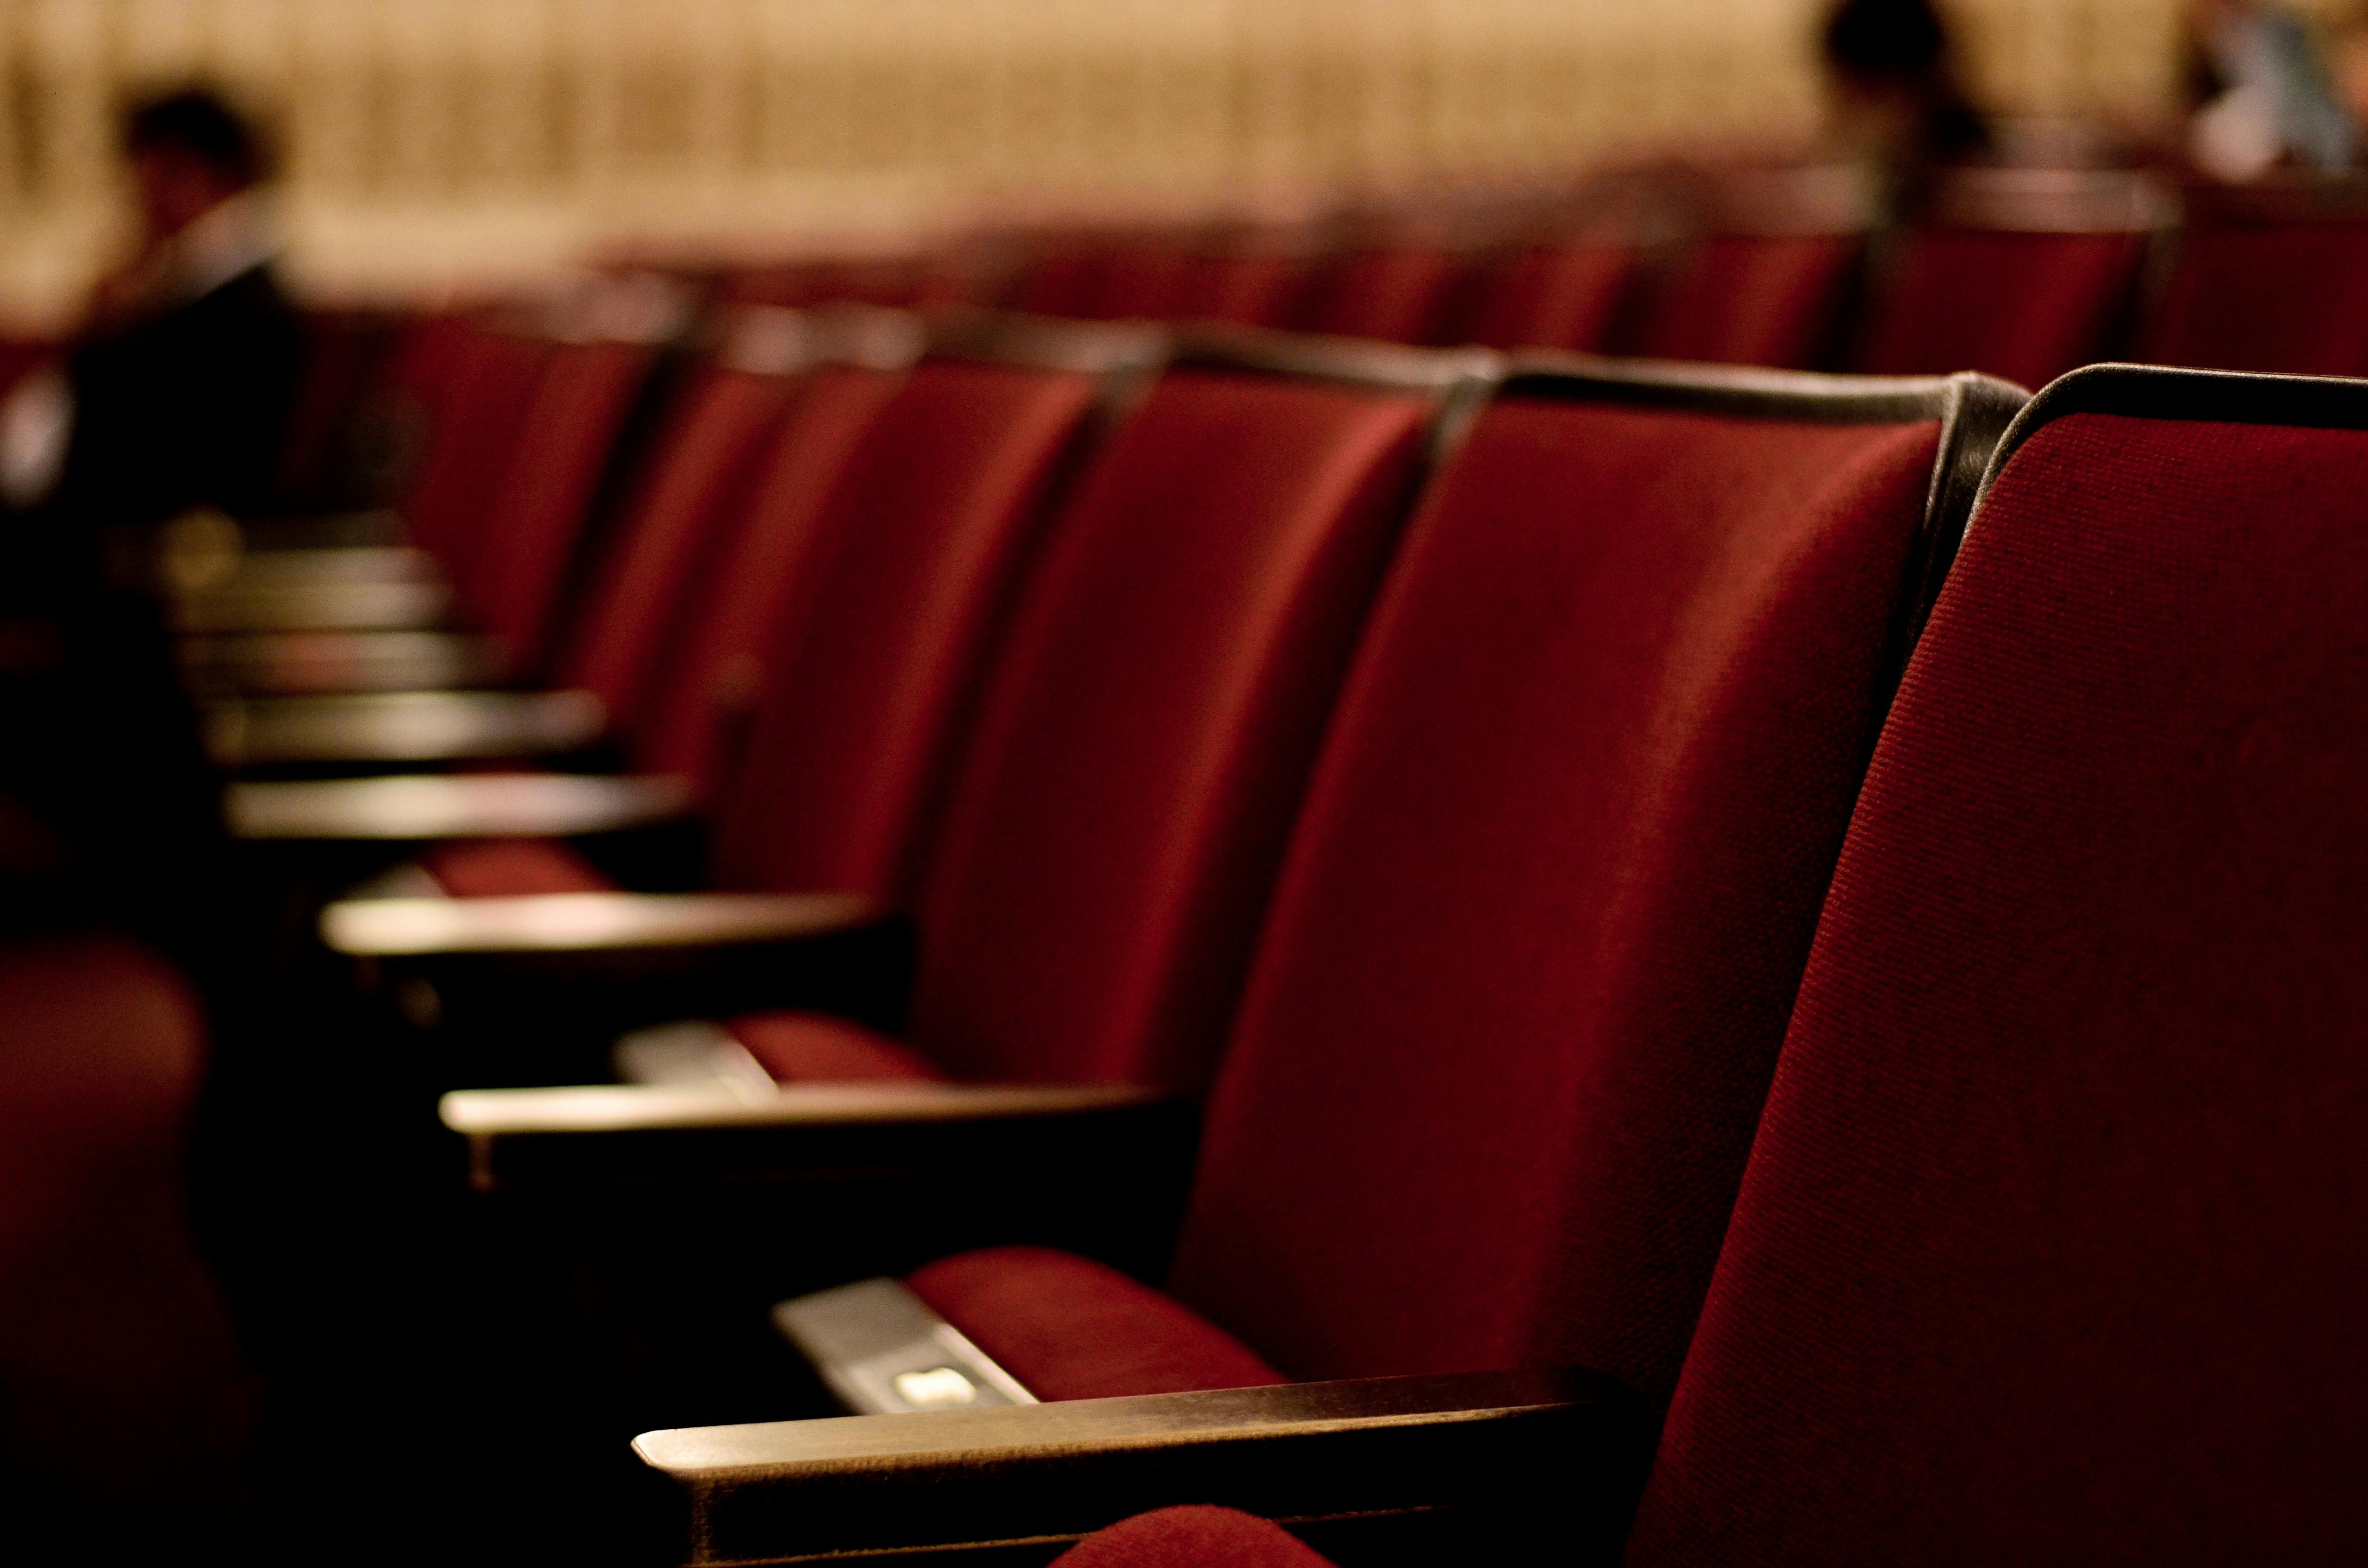 Free stock photo of red, rows of seats, seats